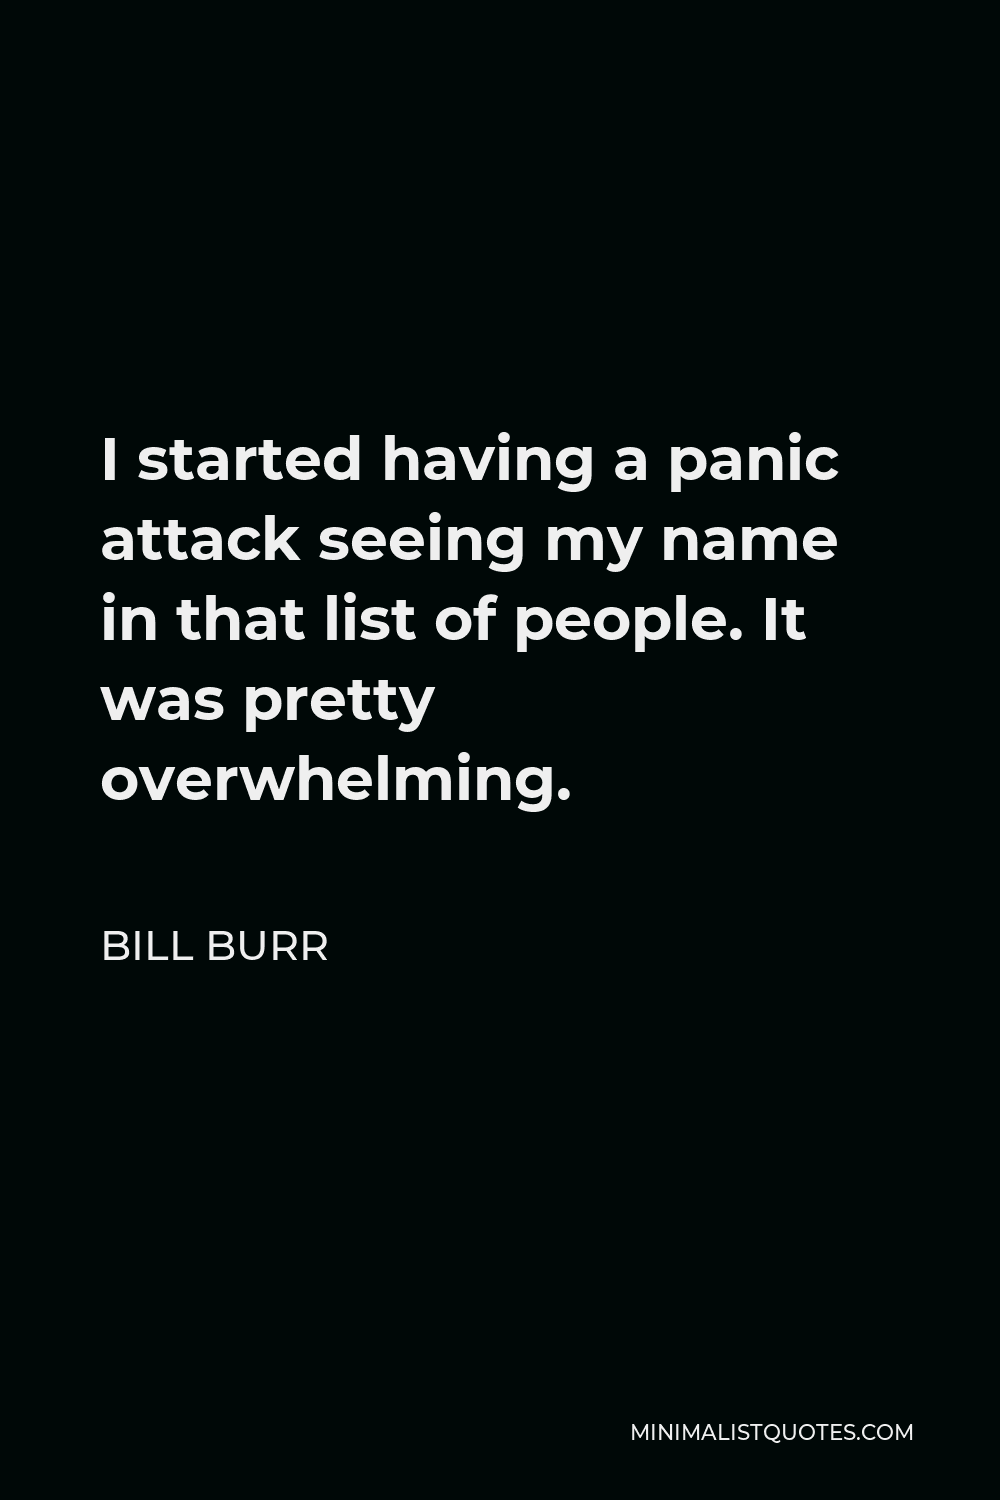 Bill Burr Quote - I started having a panic attack seeing my name in that list of people. It was pretty overwhelming.